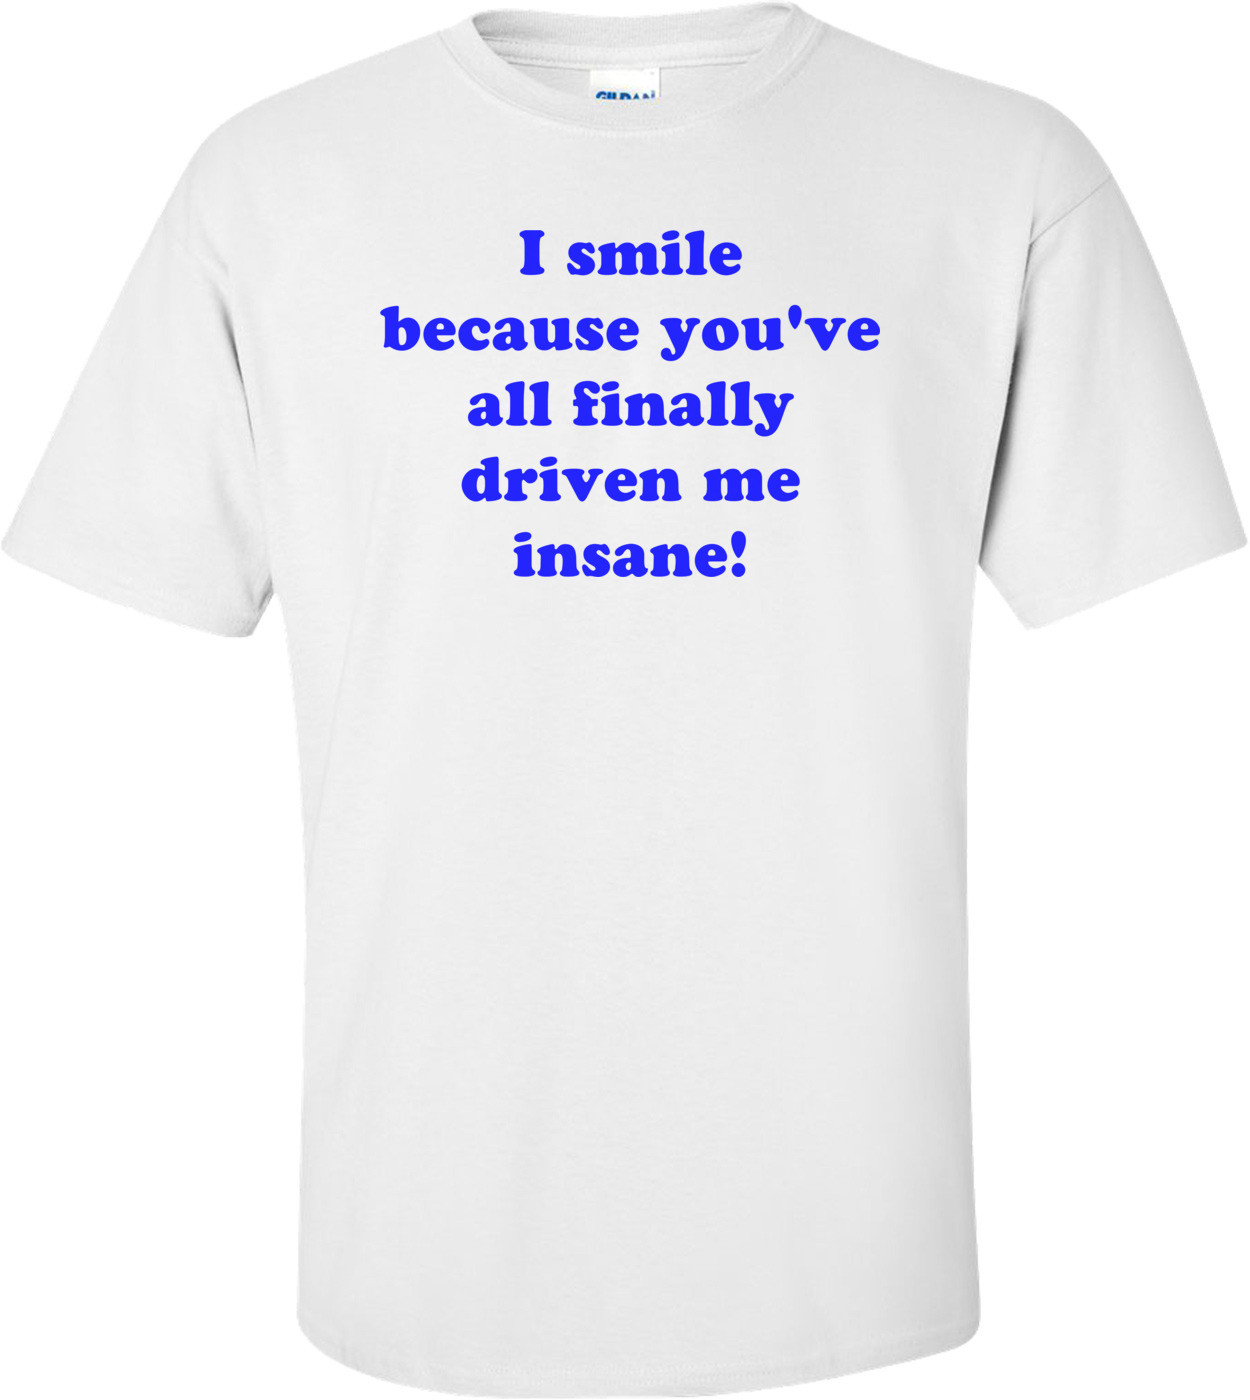 I smile because you've all finally driven me insane! Shirt